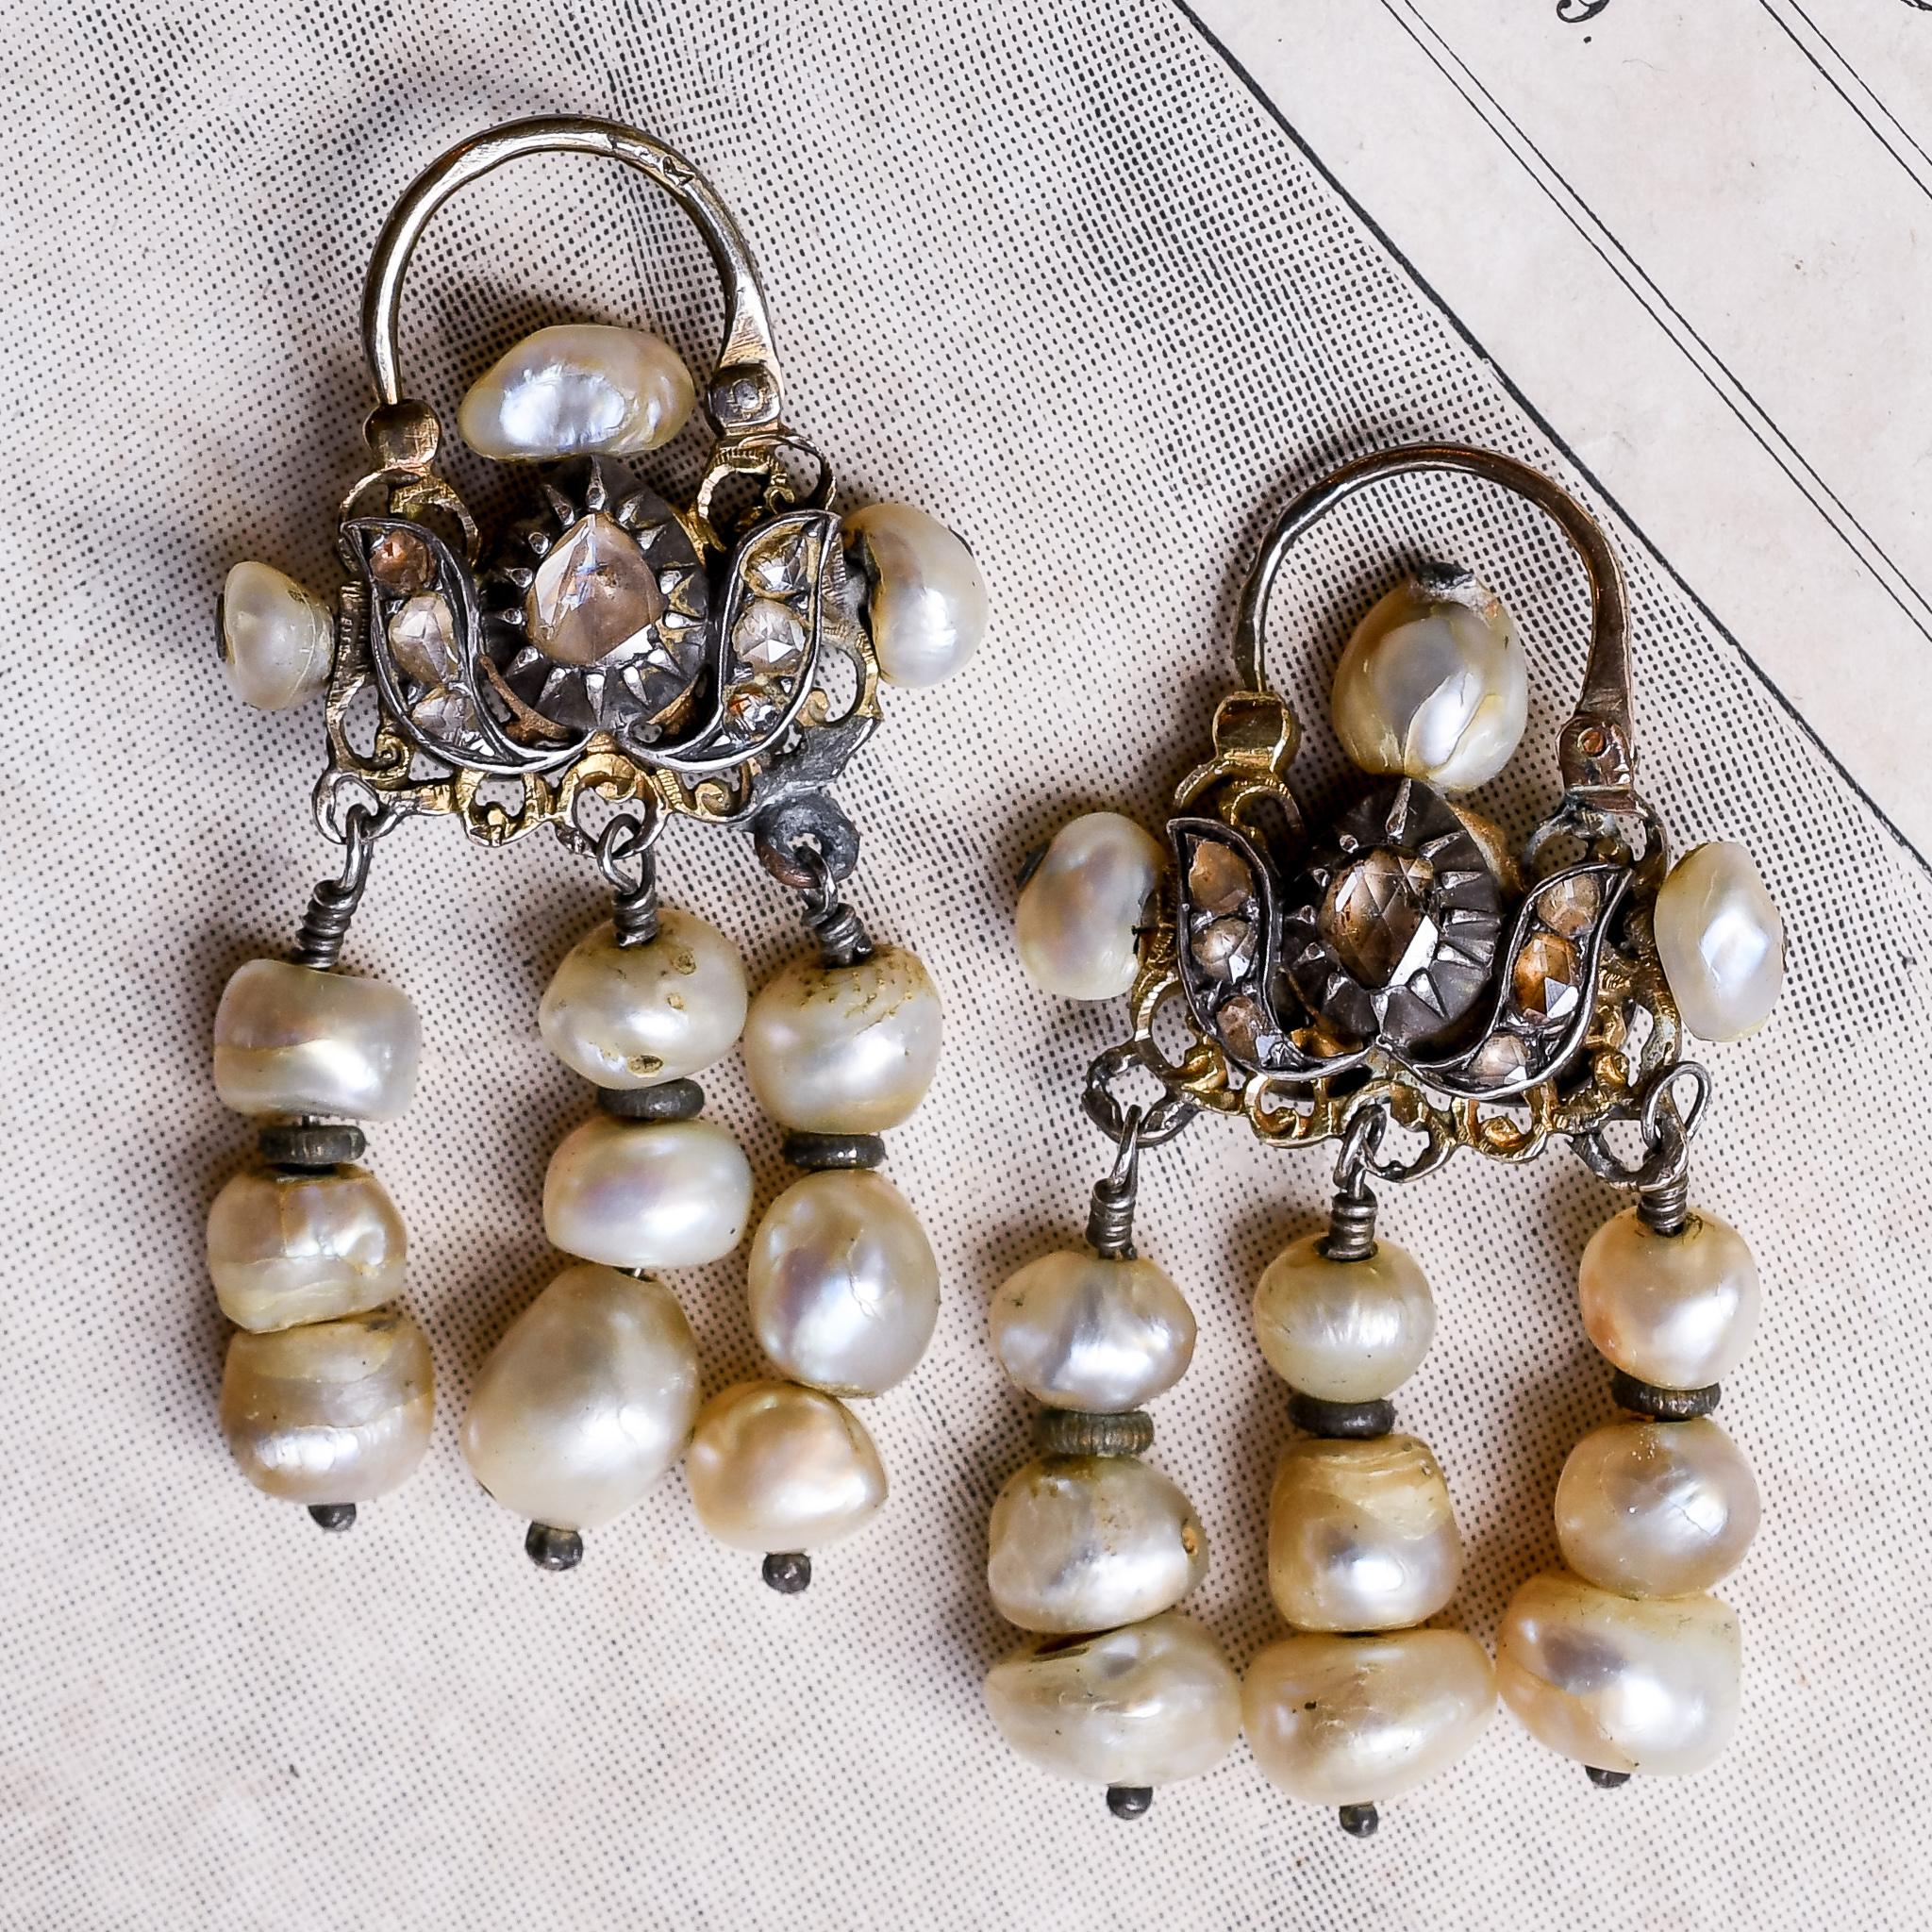 Women's or Men's Antique 19th Century Maghreb Diamond Pearl Earrings For Sale